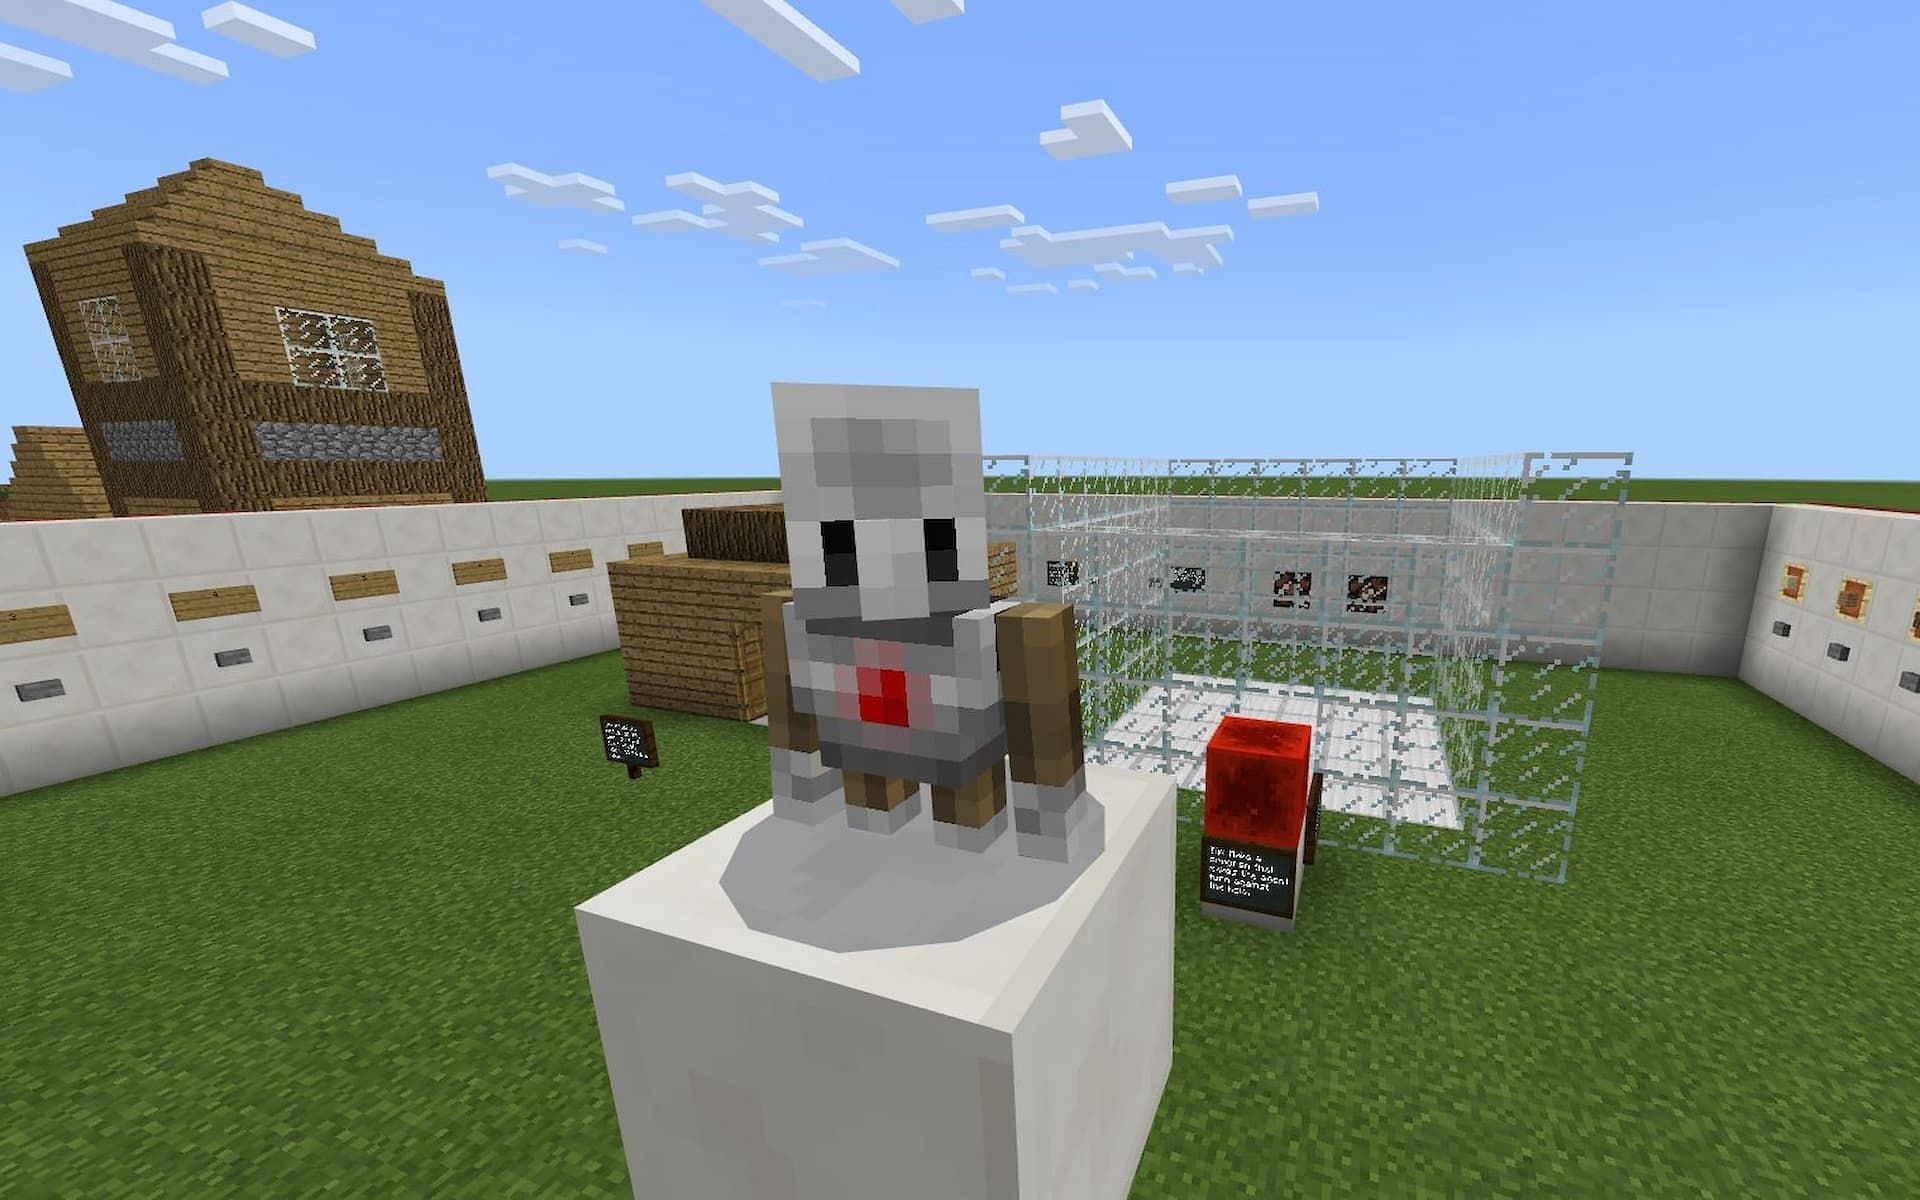 The Agent can help players in Education Edition (Image via education.minecraft.net)